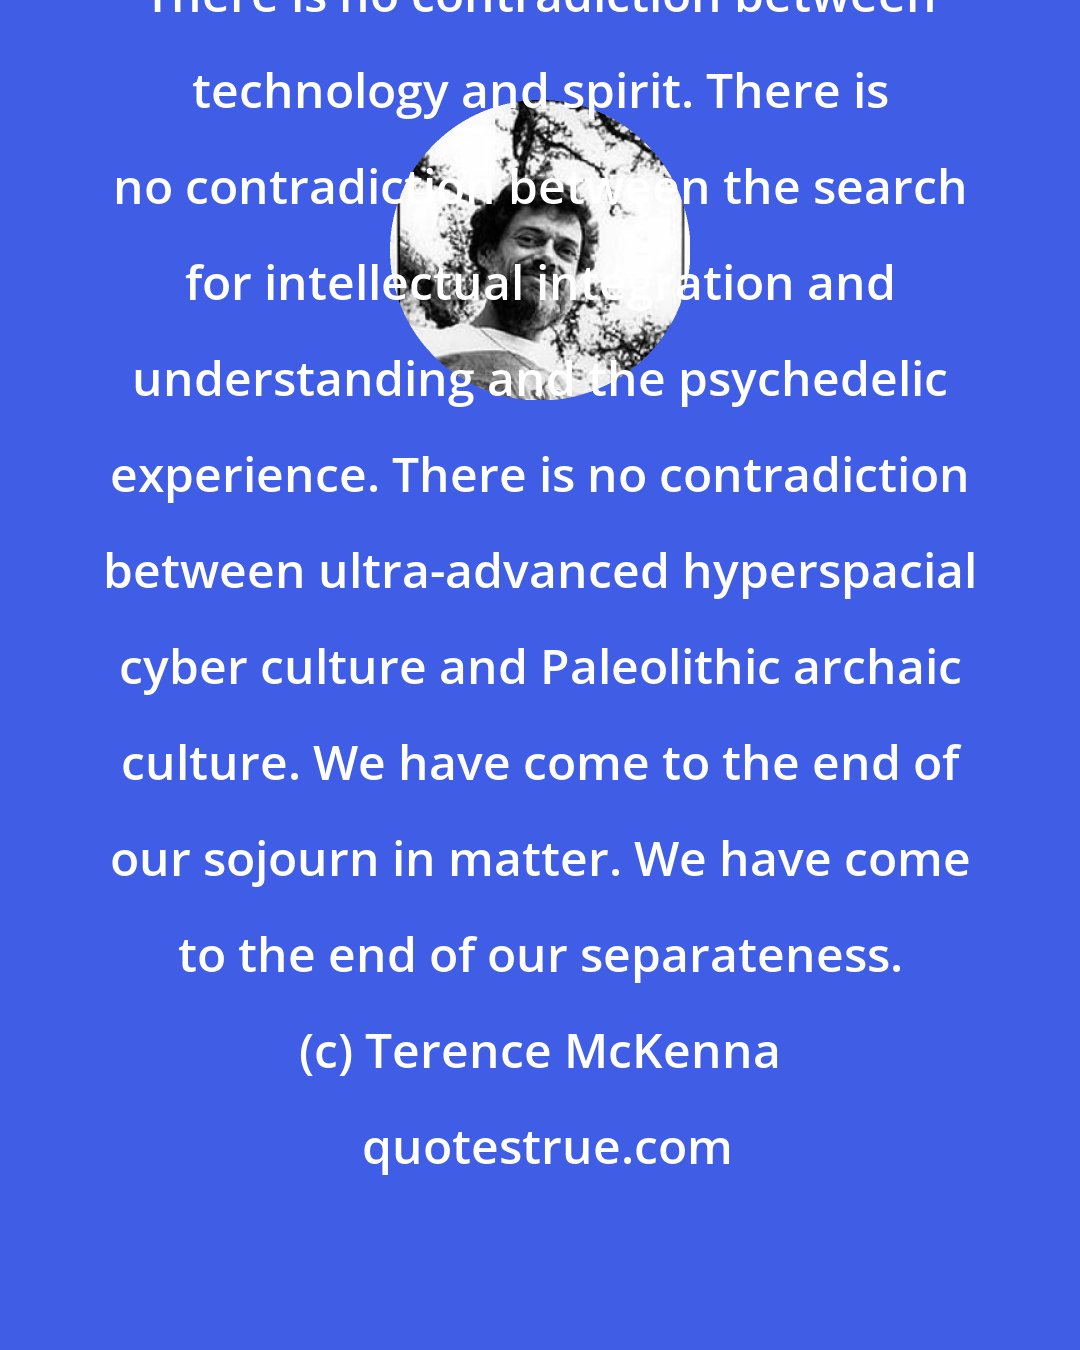 Terence McKenna: There is no contradiction between technology and spirit. There is no contradiction between the search for intellectual integration and understanding and the psychedelic experience. There is no contradiction between ultra-advanced hyperspacial cyber culture and Paleolithic archaic culture. We have come to the end of our sojourn in matter. We have come to the end of our separateness.